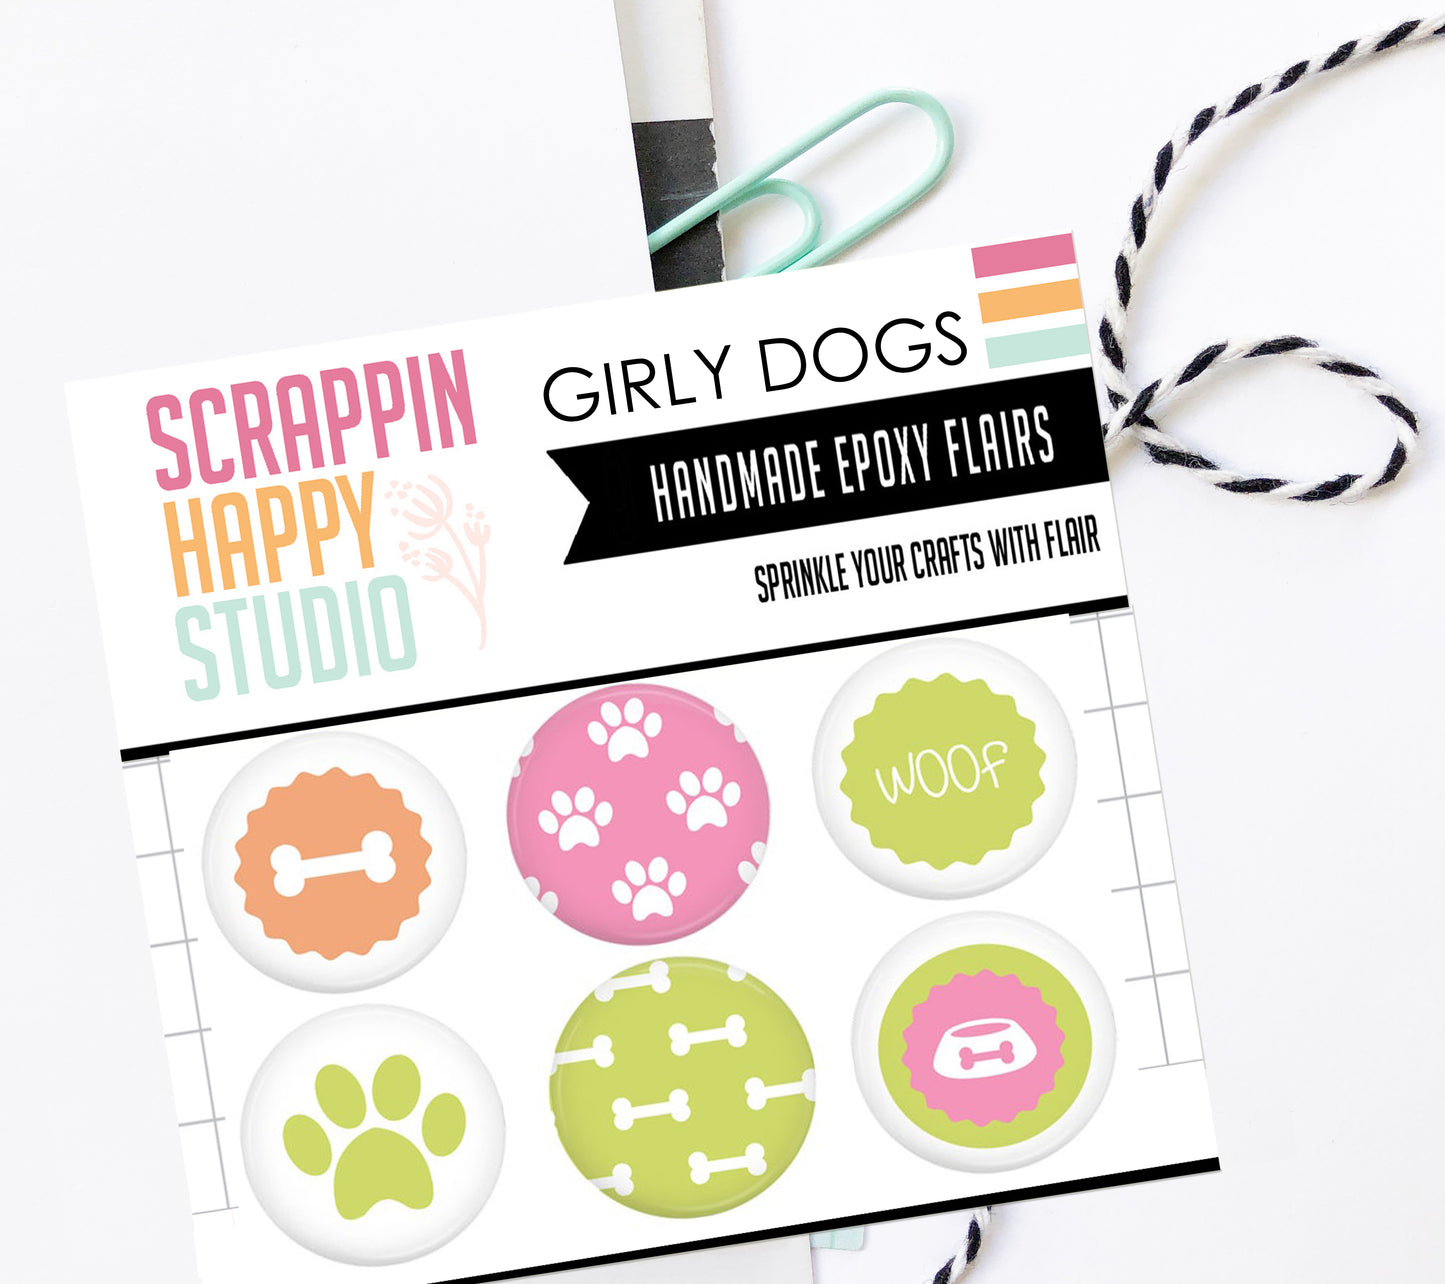 Girly Dogs Epoxy Flair